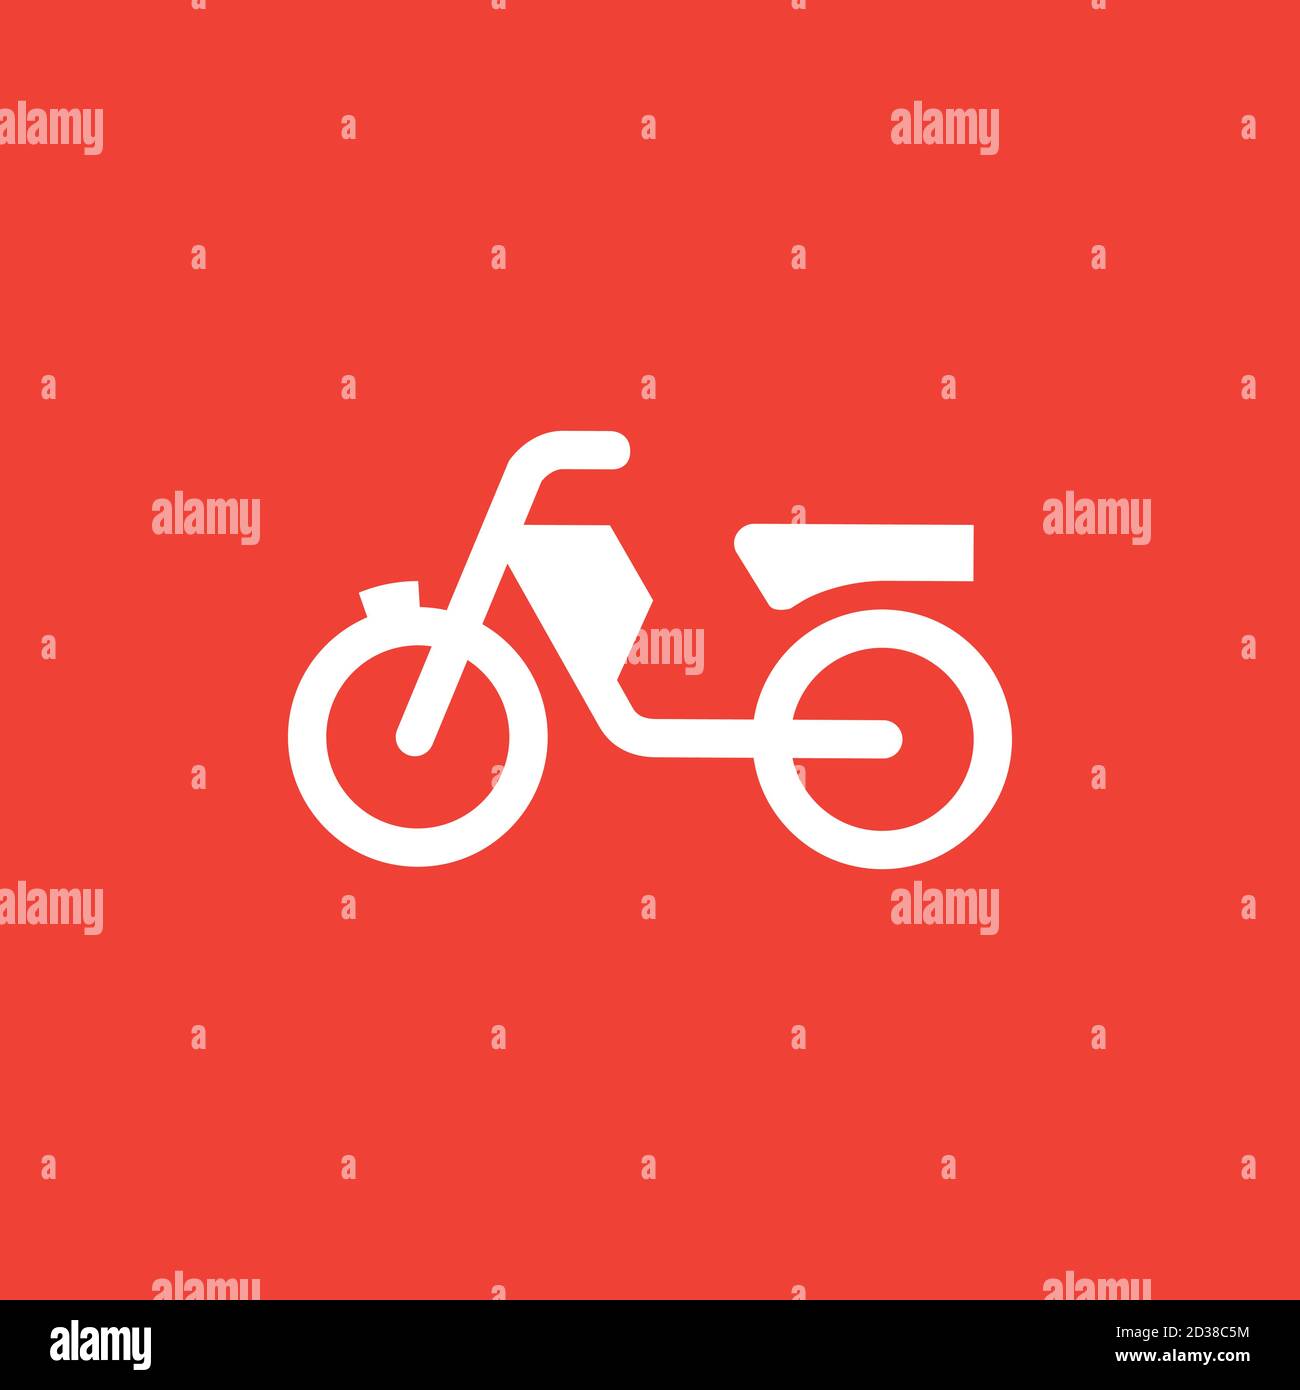 Motorcycle Icon On Red Background. Red Flat Style Vector Illustration. Stock Vector